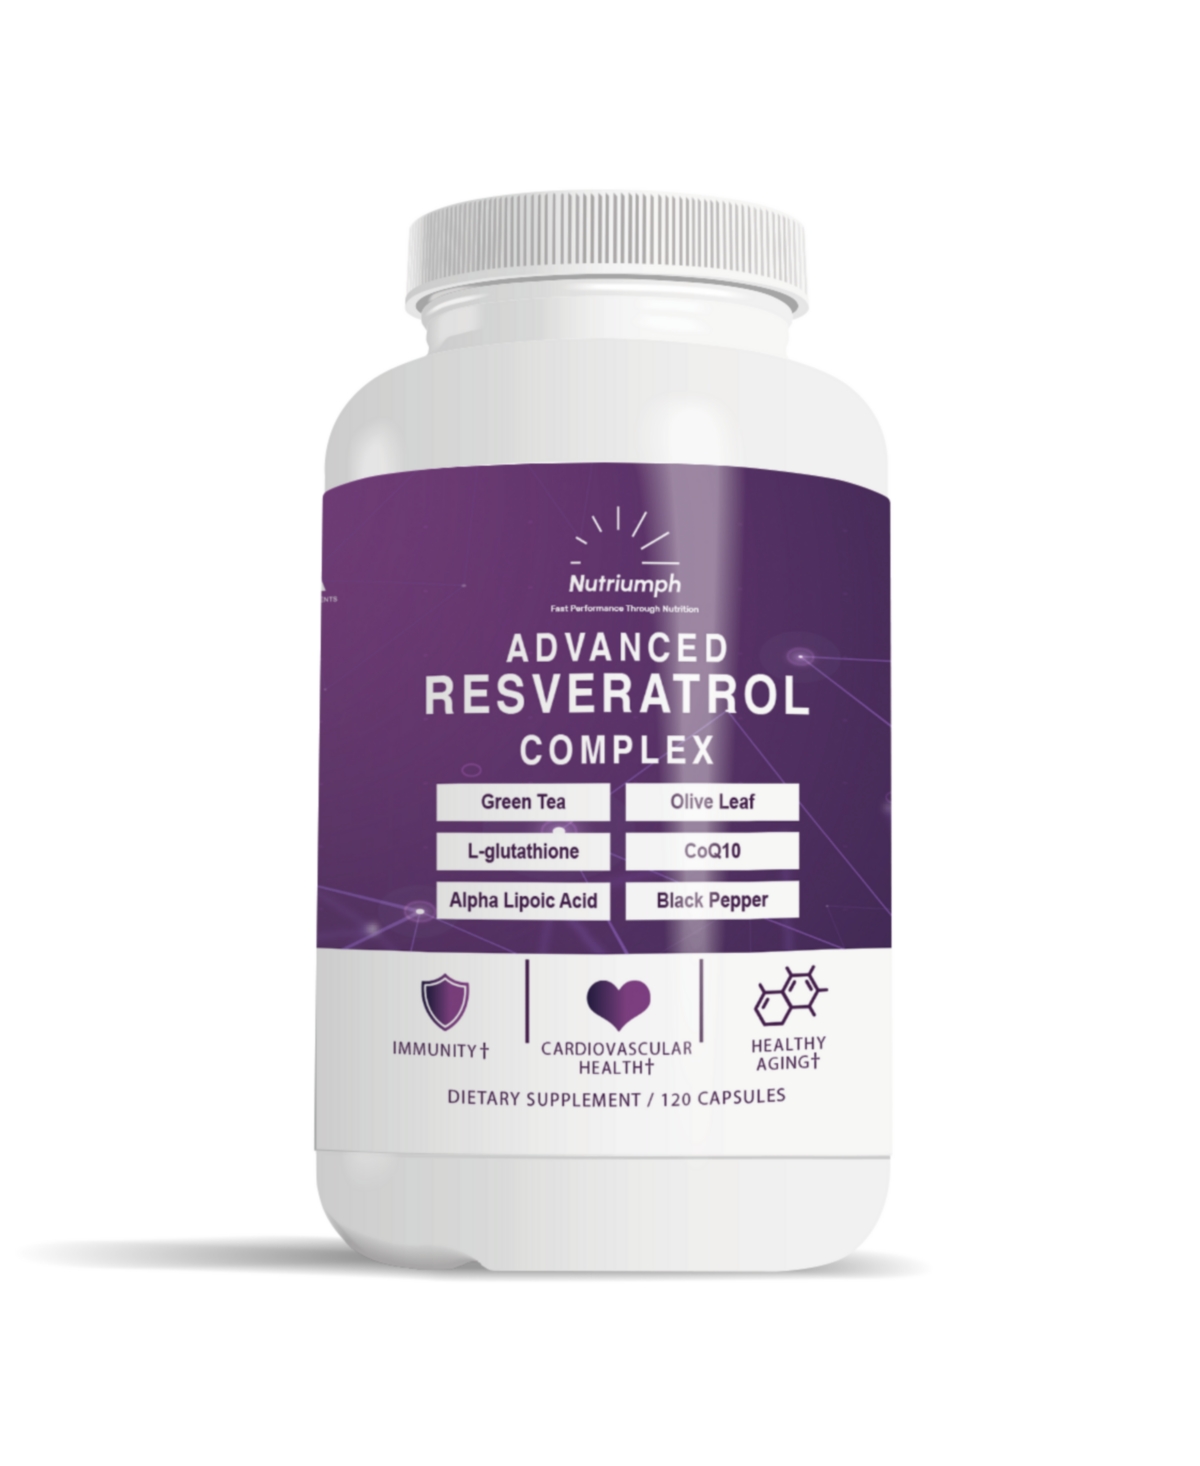 Advanced Resveratrol Complex - Anti-aging and Anti-Inflammatory support